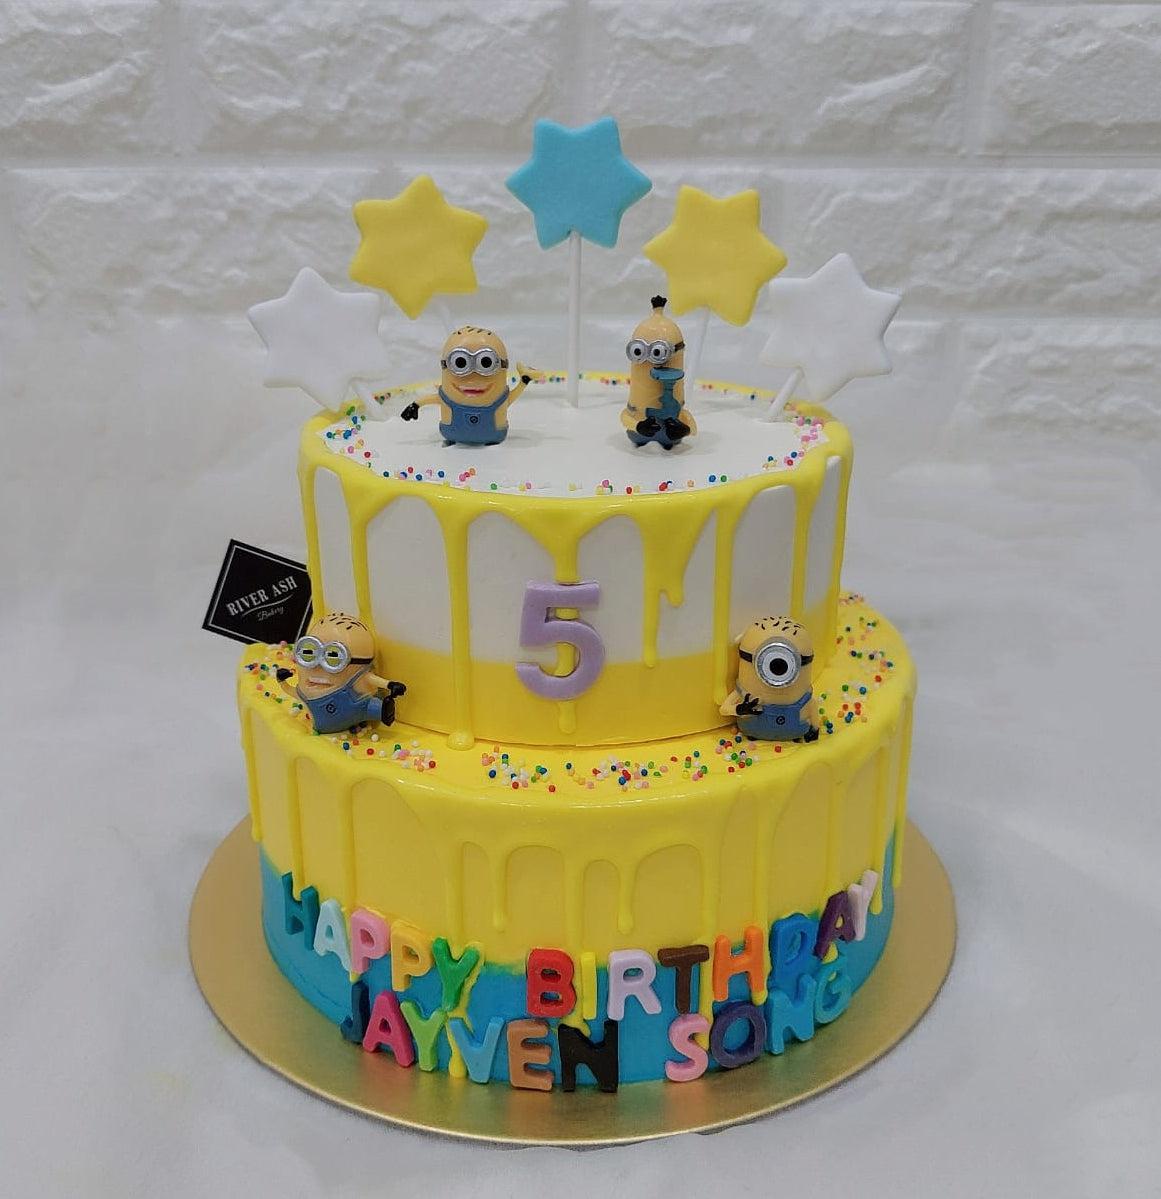 Buy Lovely Minion Cake Online | Chef Bakers